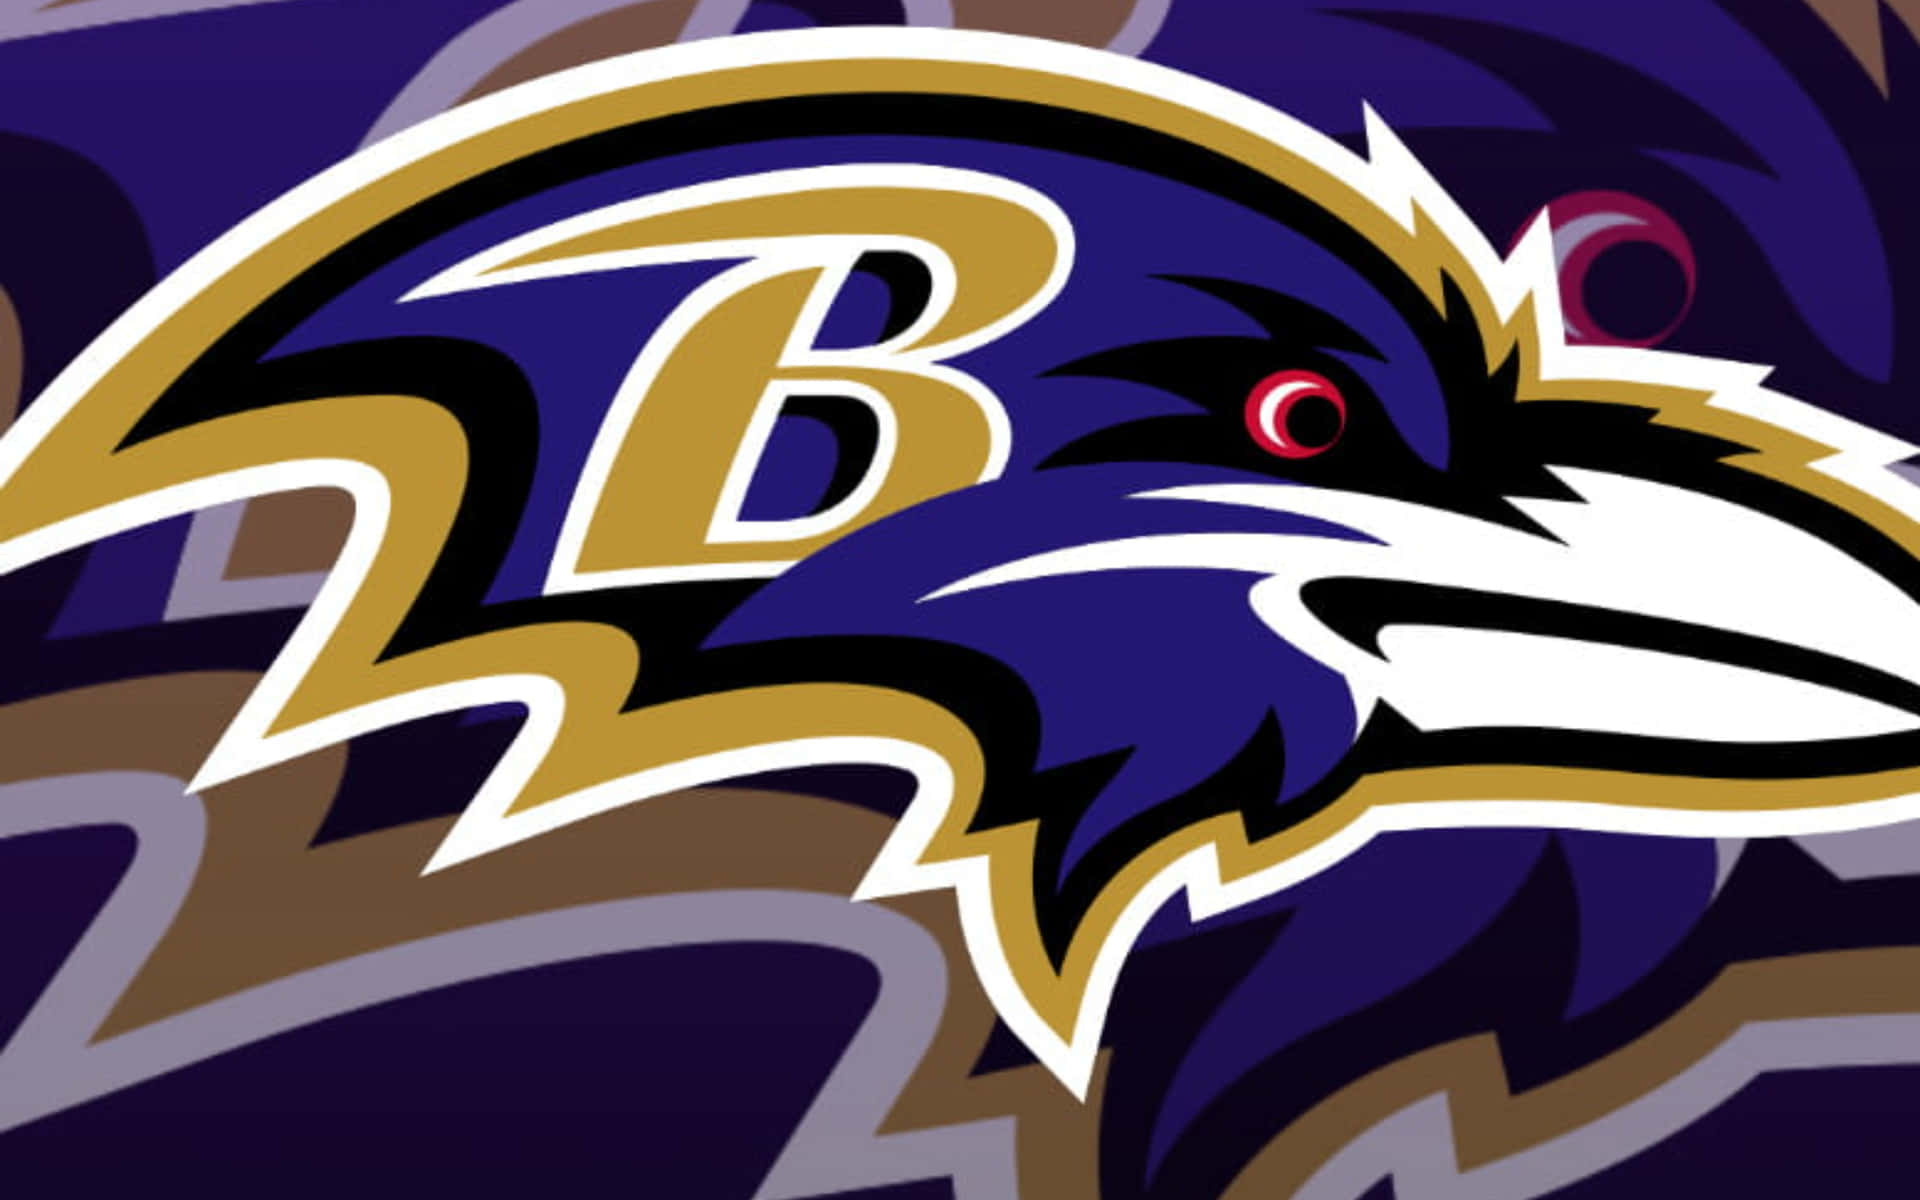 Download The official Baltimore Ravens logo, representing a rich